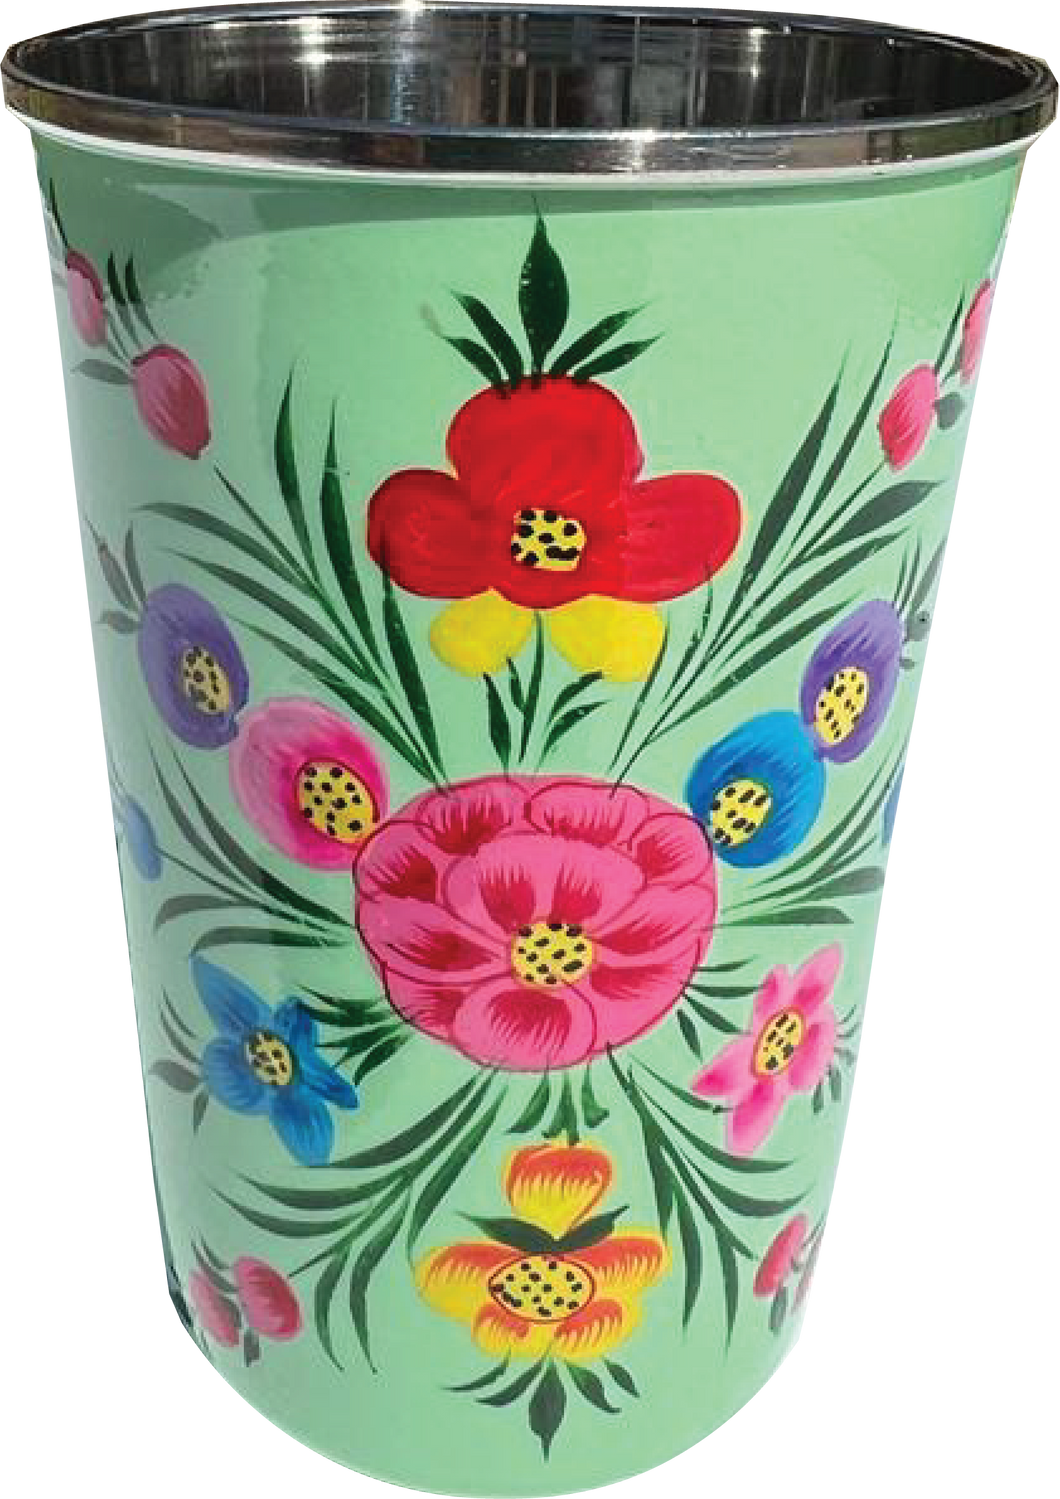 Hand painted floral design stainless steel tumbler in green